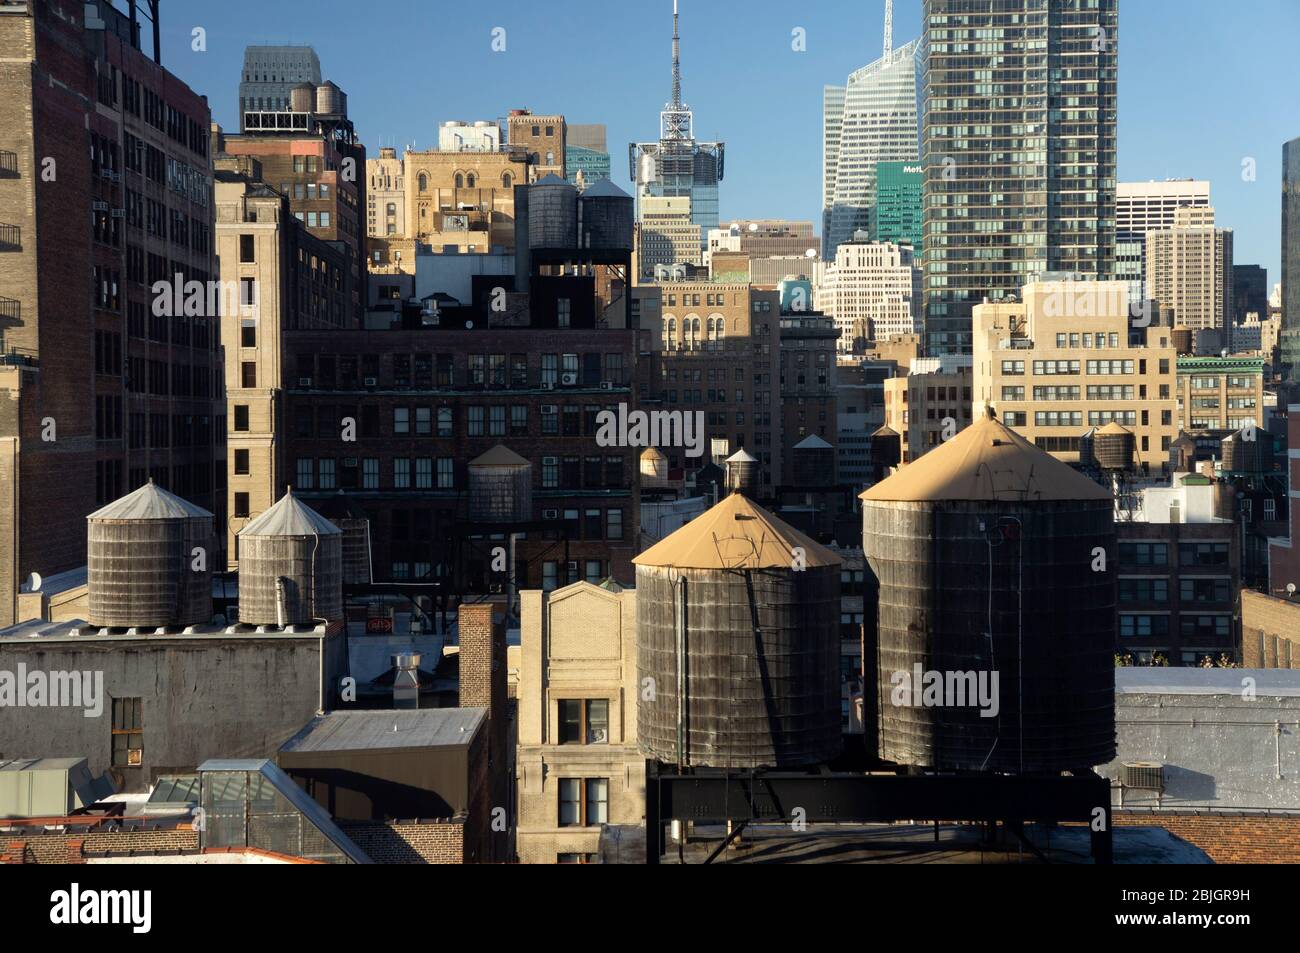 View across rooftops of Manhattan with iconic water tanks of New York Stock Photo